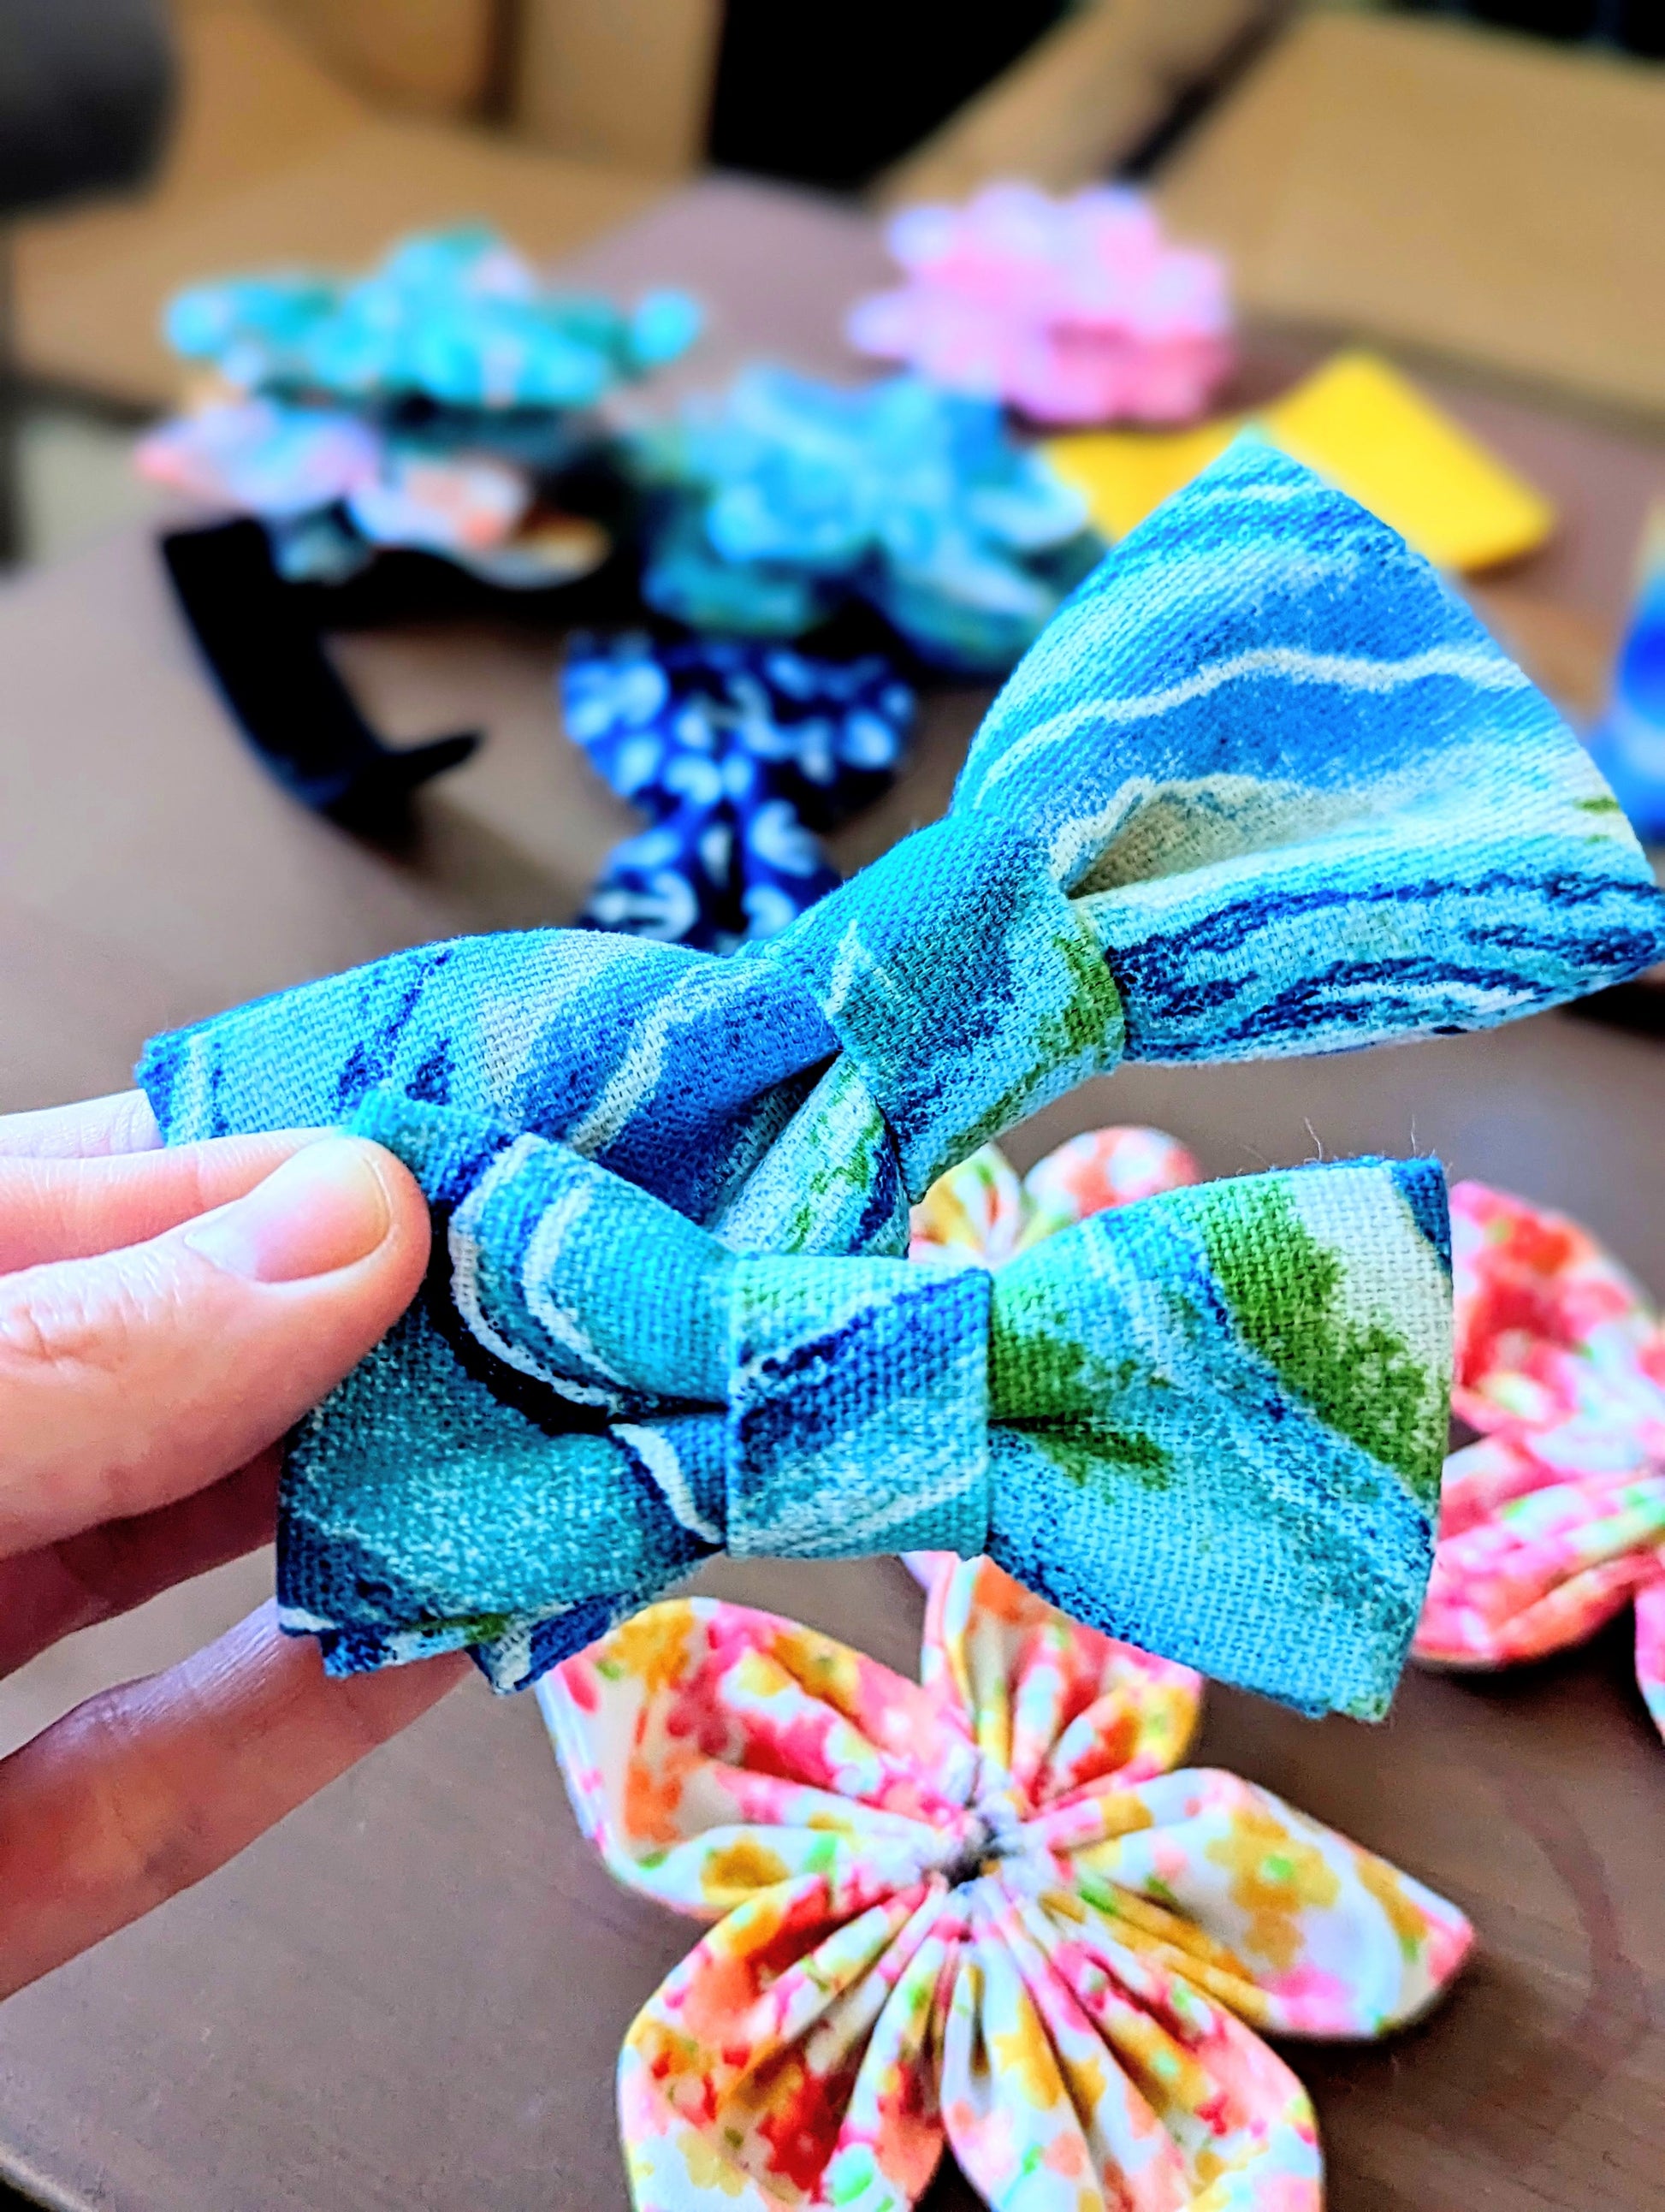 Discover handsewn dog bowties made in Annapolis, Maryland by Pickledillie Designs. Elevate your pet's style with unique cloth pet fashion accessories. Shop small and support local artisans.